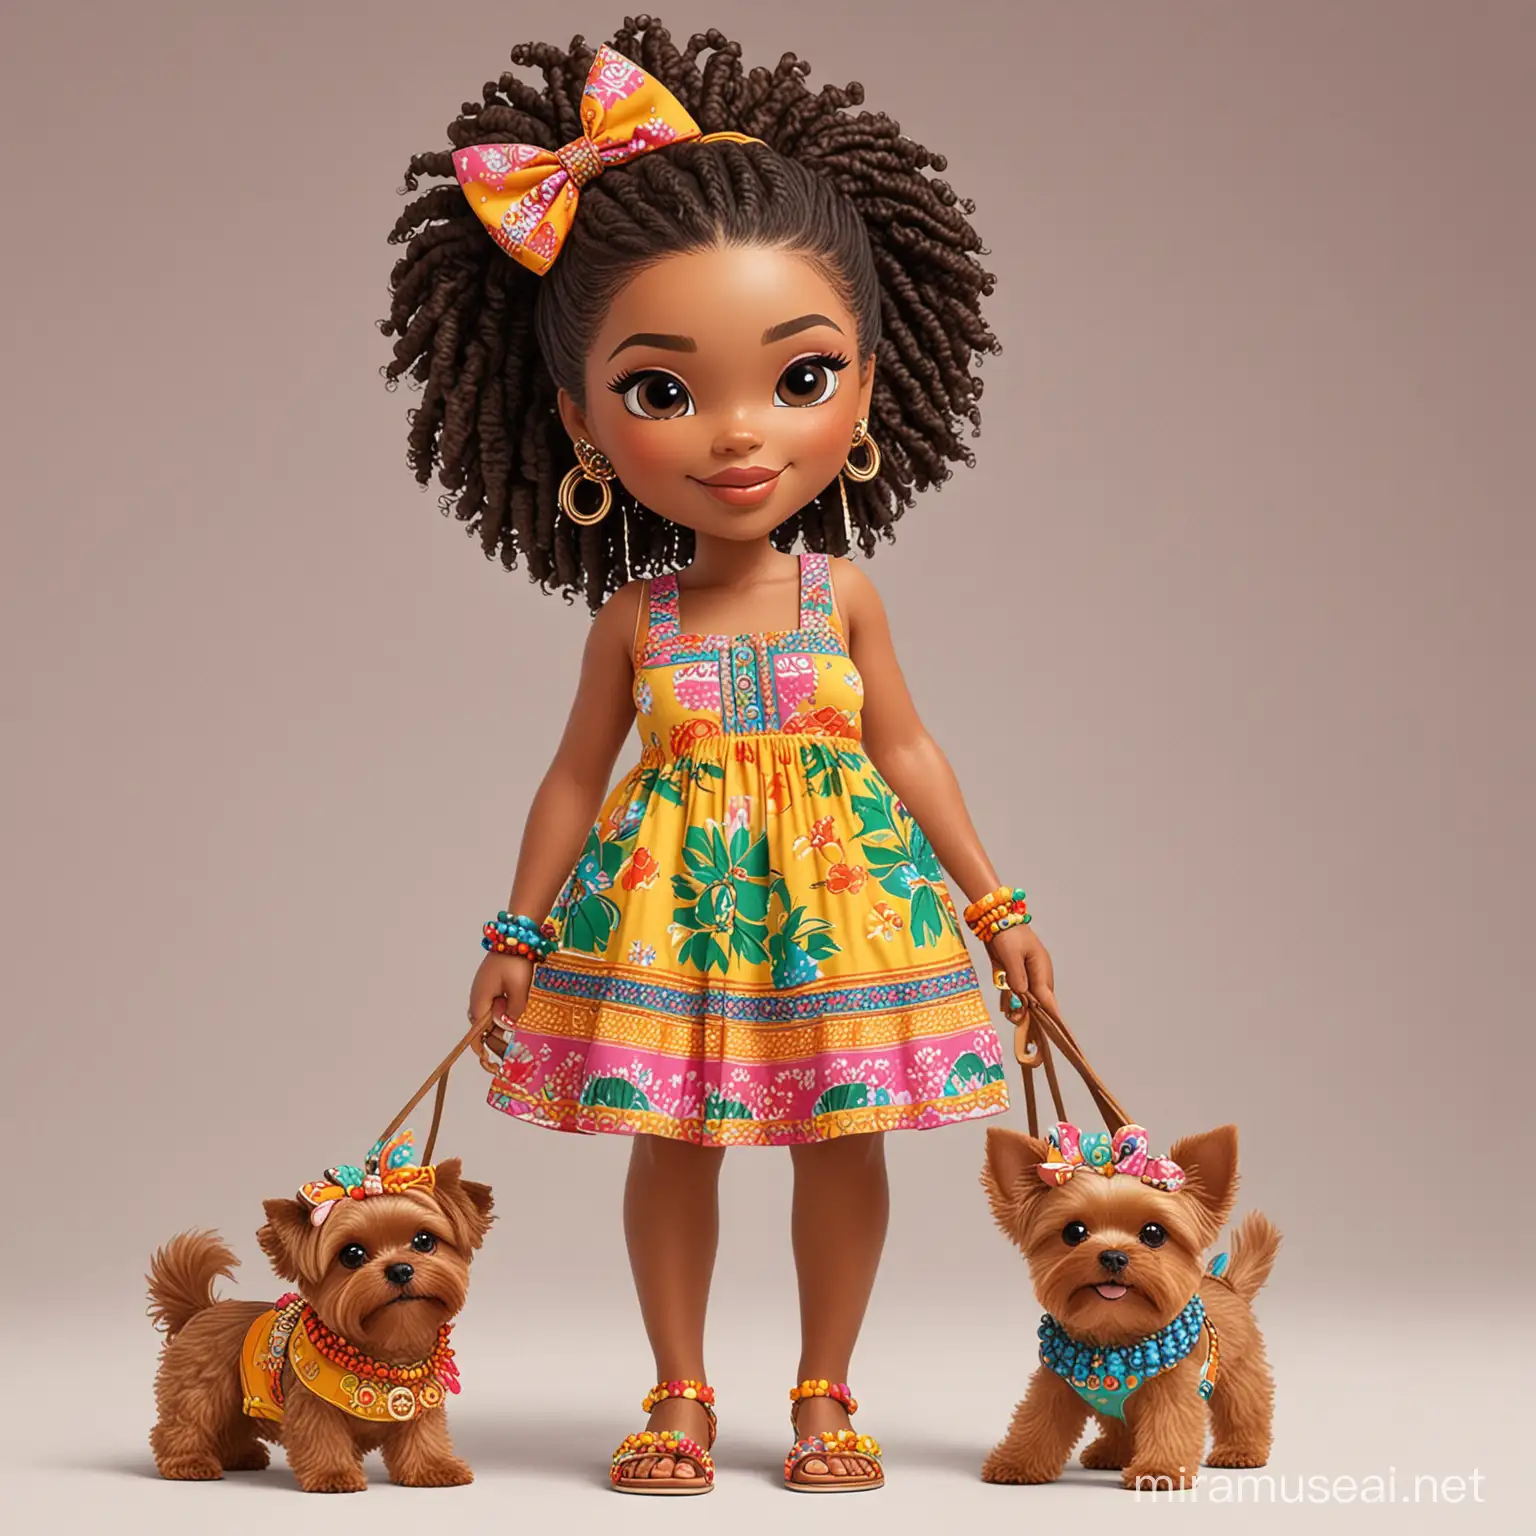 create a full body image of a cartoon picture of a BEAUTIFUL curvy african american woman and her Yorkie dog, her makeup is flawless and natural, she is wearing a colorful sundress and wearing colorful bracelets stacks, she if wear sister locs hairstyle, she is wearing colorful Tory Burch sandals. the top of her head and her feet or displayed in image.